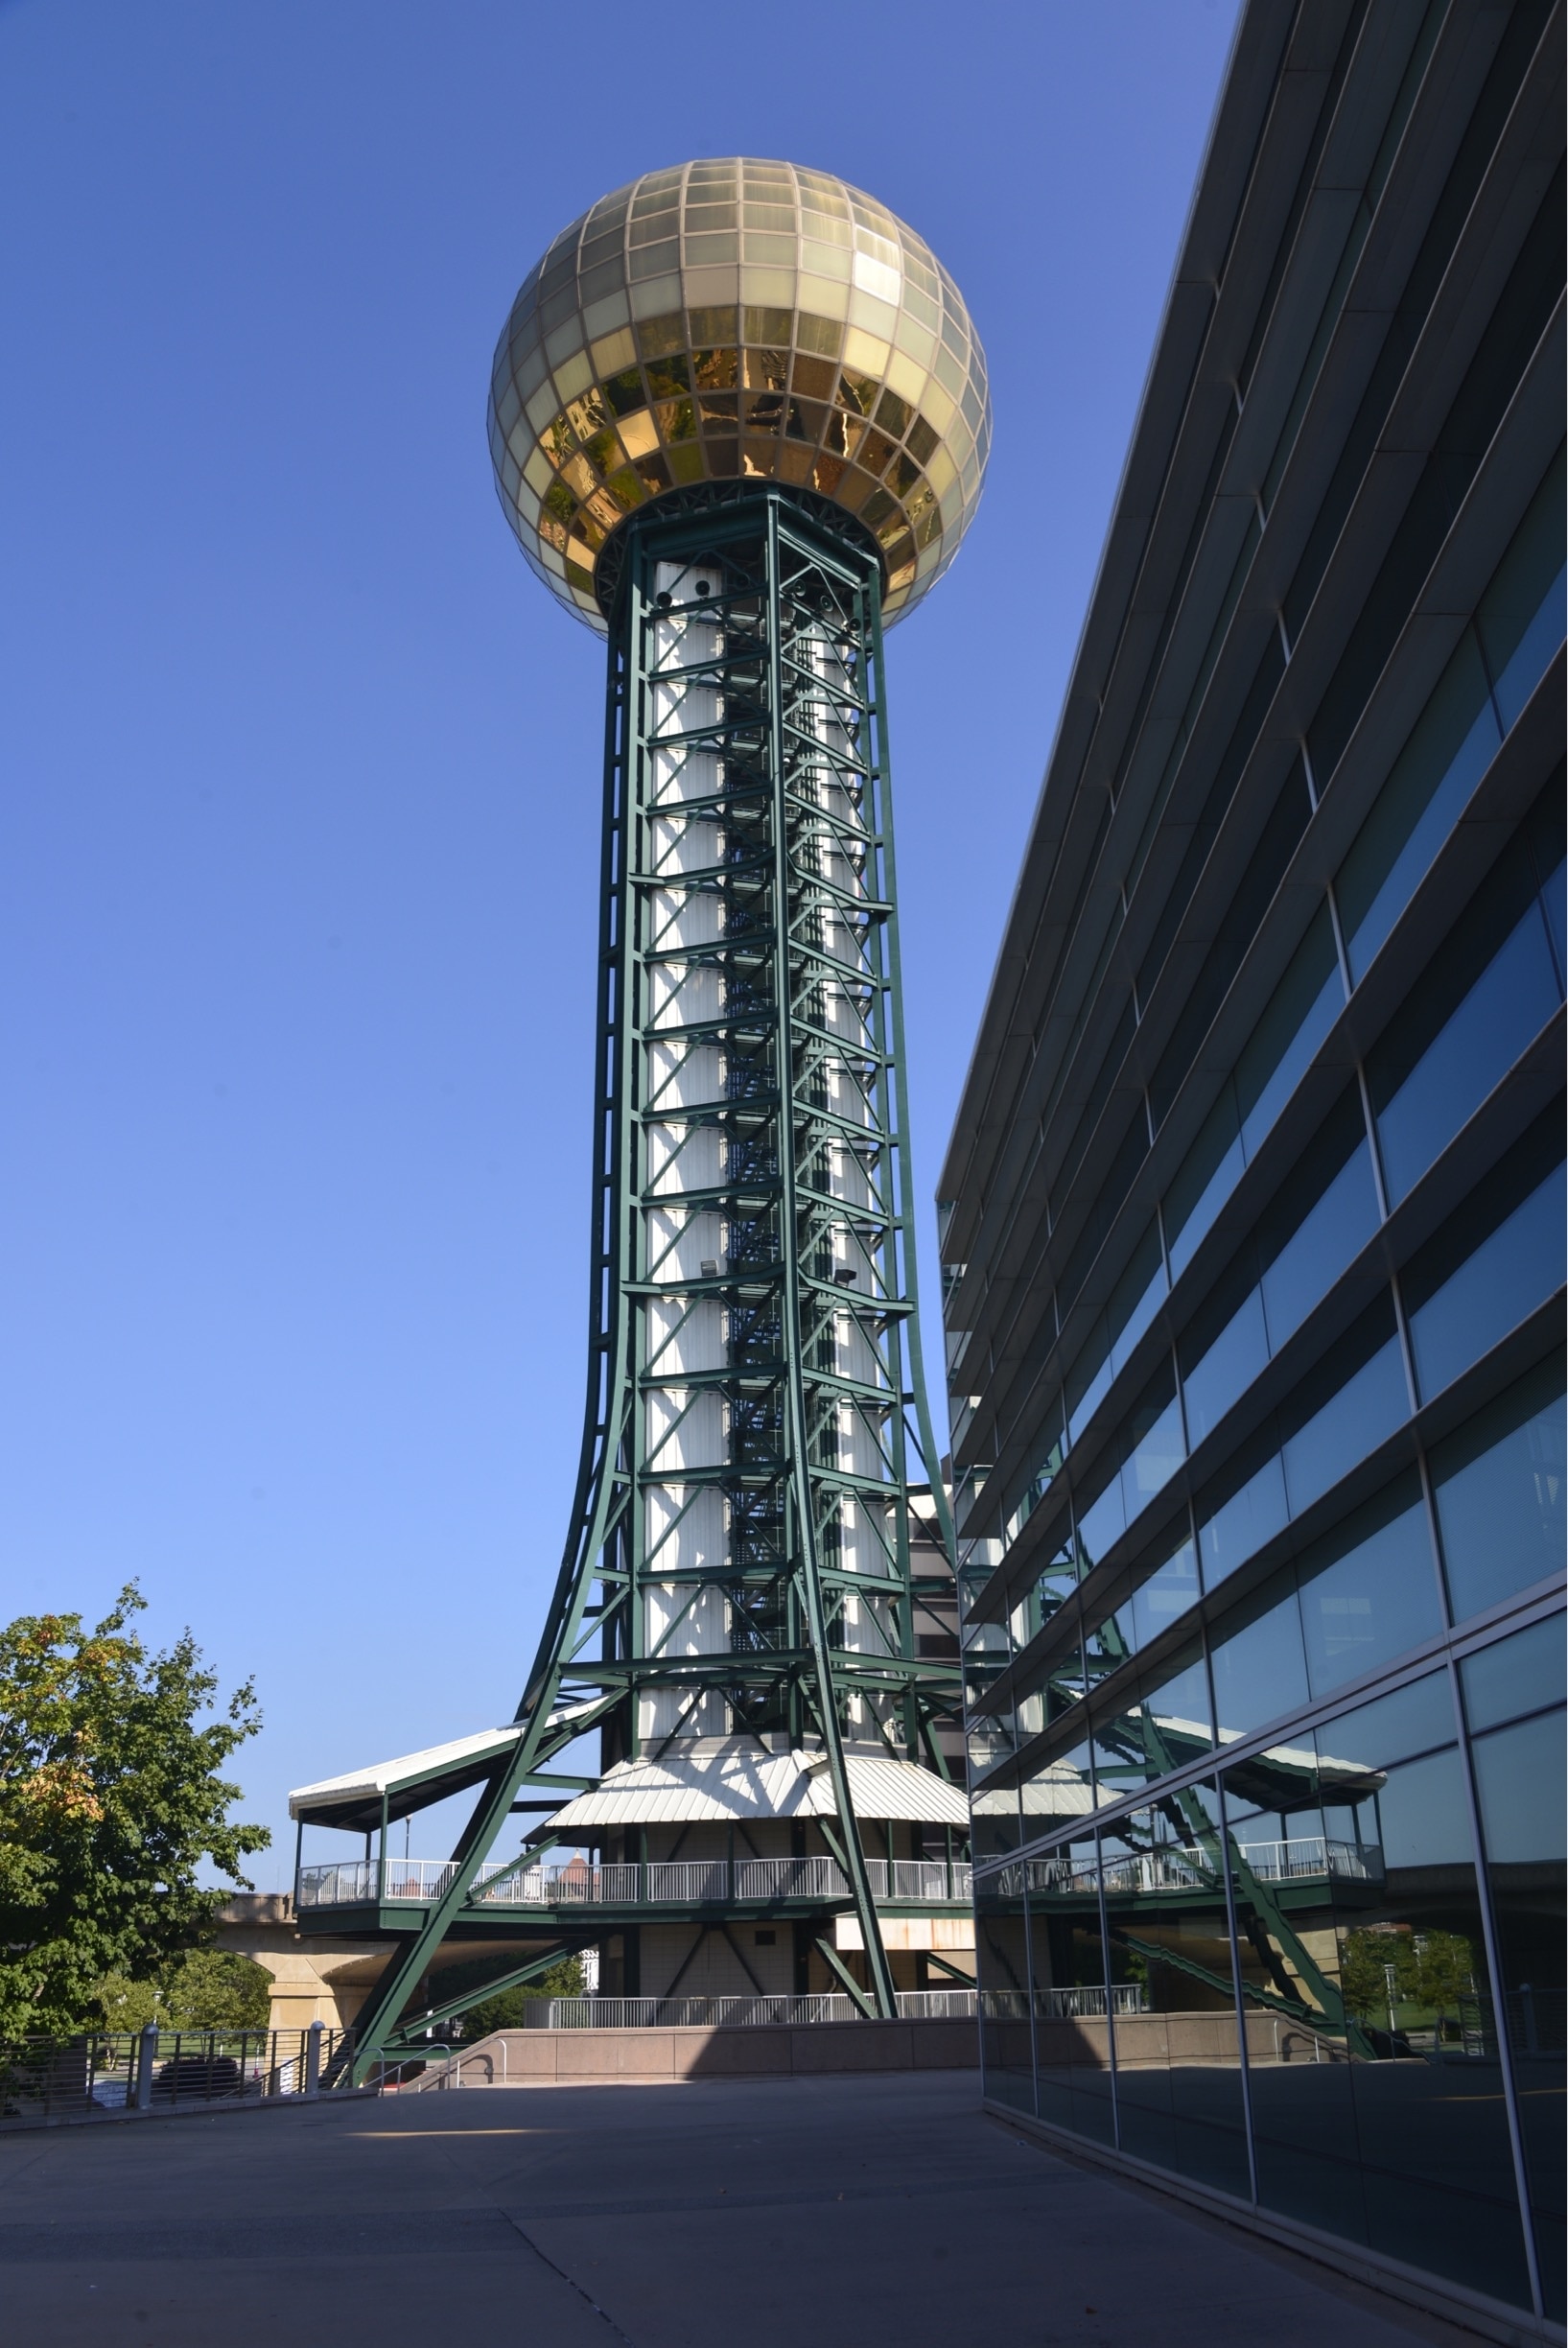 Visit the observation deck for a great view of Knoxville. 

From the city's website:

The Sunsphere was constructed for the 1982 World's Fair and during that time, it served as the symbol to the Fair. It was also home to a full service restaurant and the Observation Deck, which cost $2.00 for the elevator ride up for a visit. The Sunsphere closed to the public with the Fair's end and remained vacant or underutilized for most of its post-fair life. The Sunsphere and the Tennessee Amphitheater are the only structures that remain from the 1982 World's Fair.


